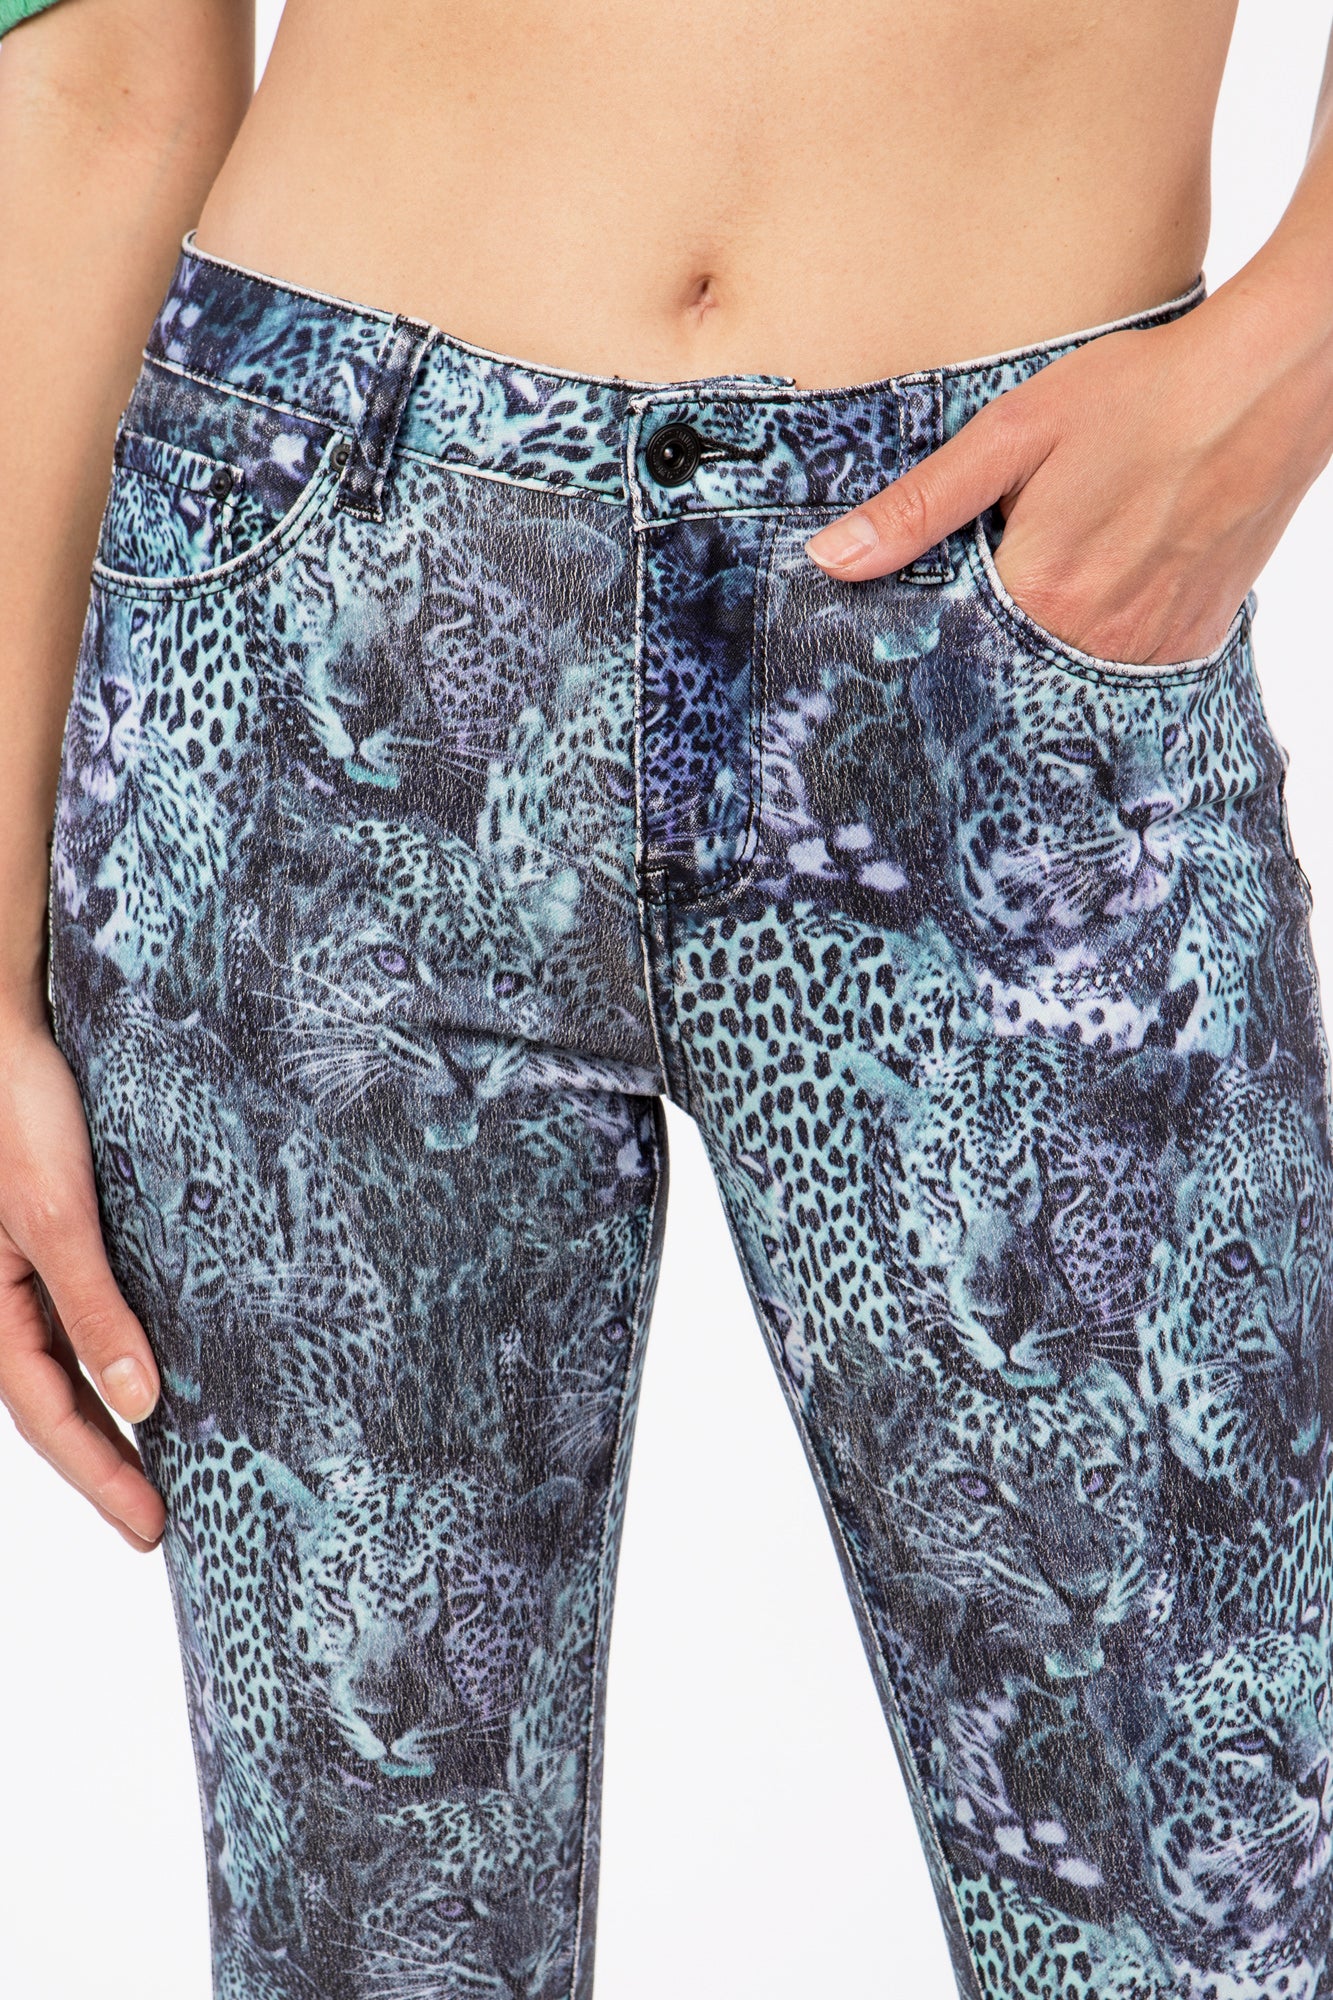 Blue panther printed coated pants - CAD